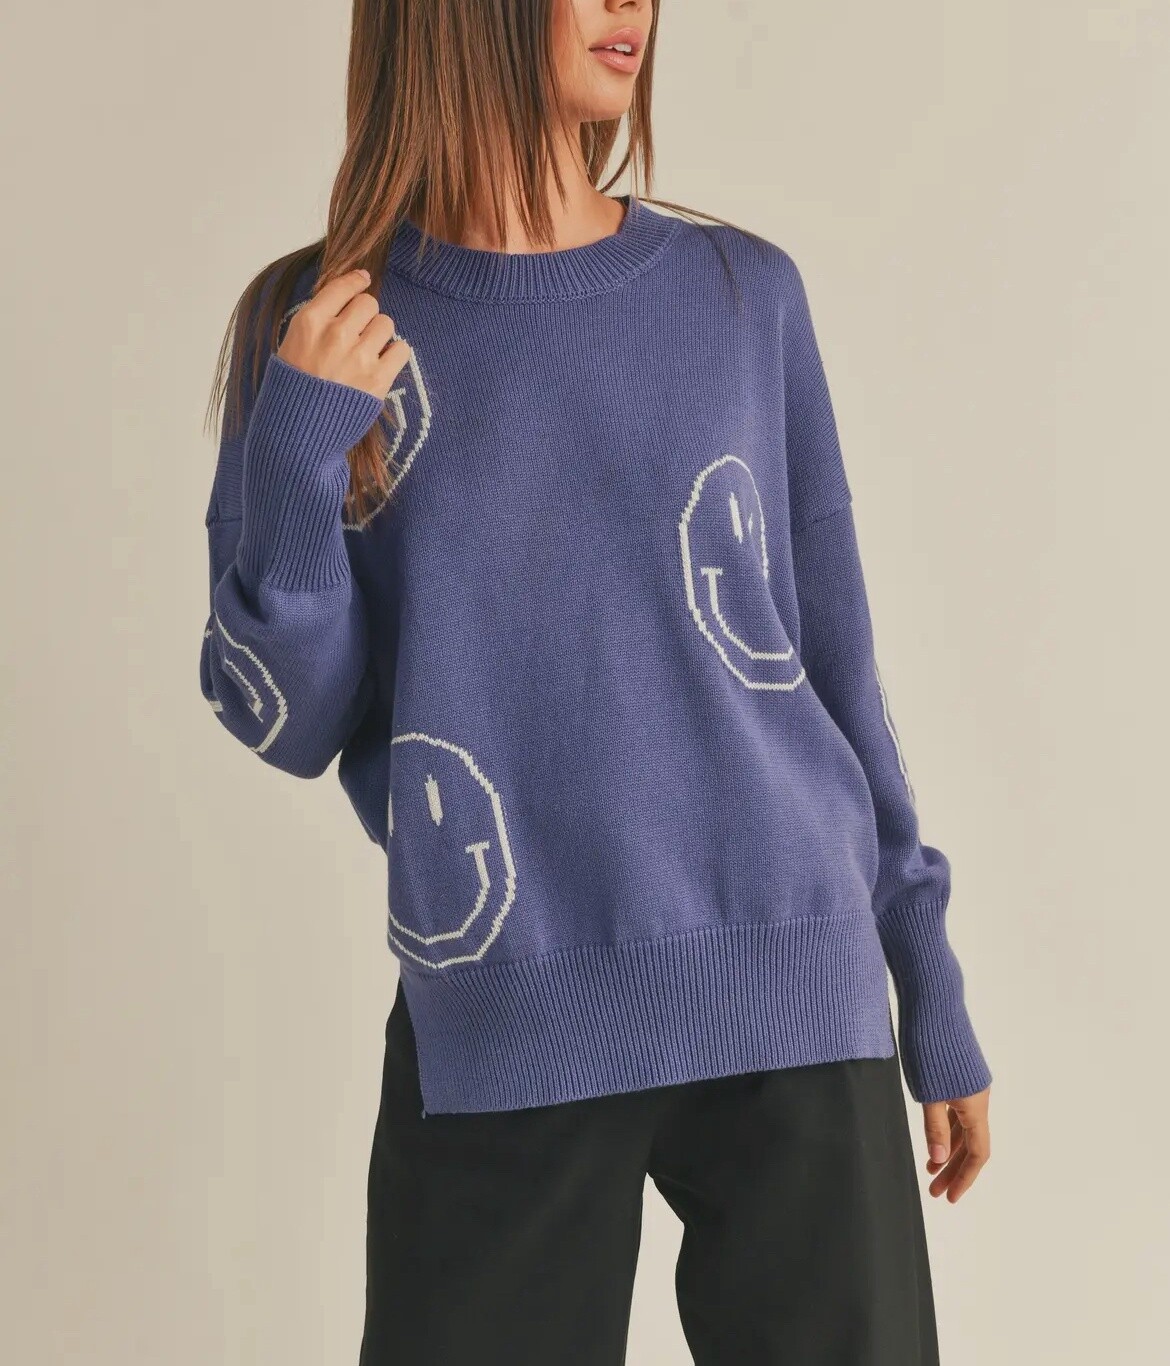 Smiley Sweater Top